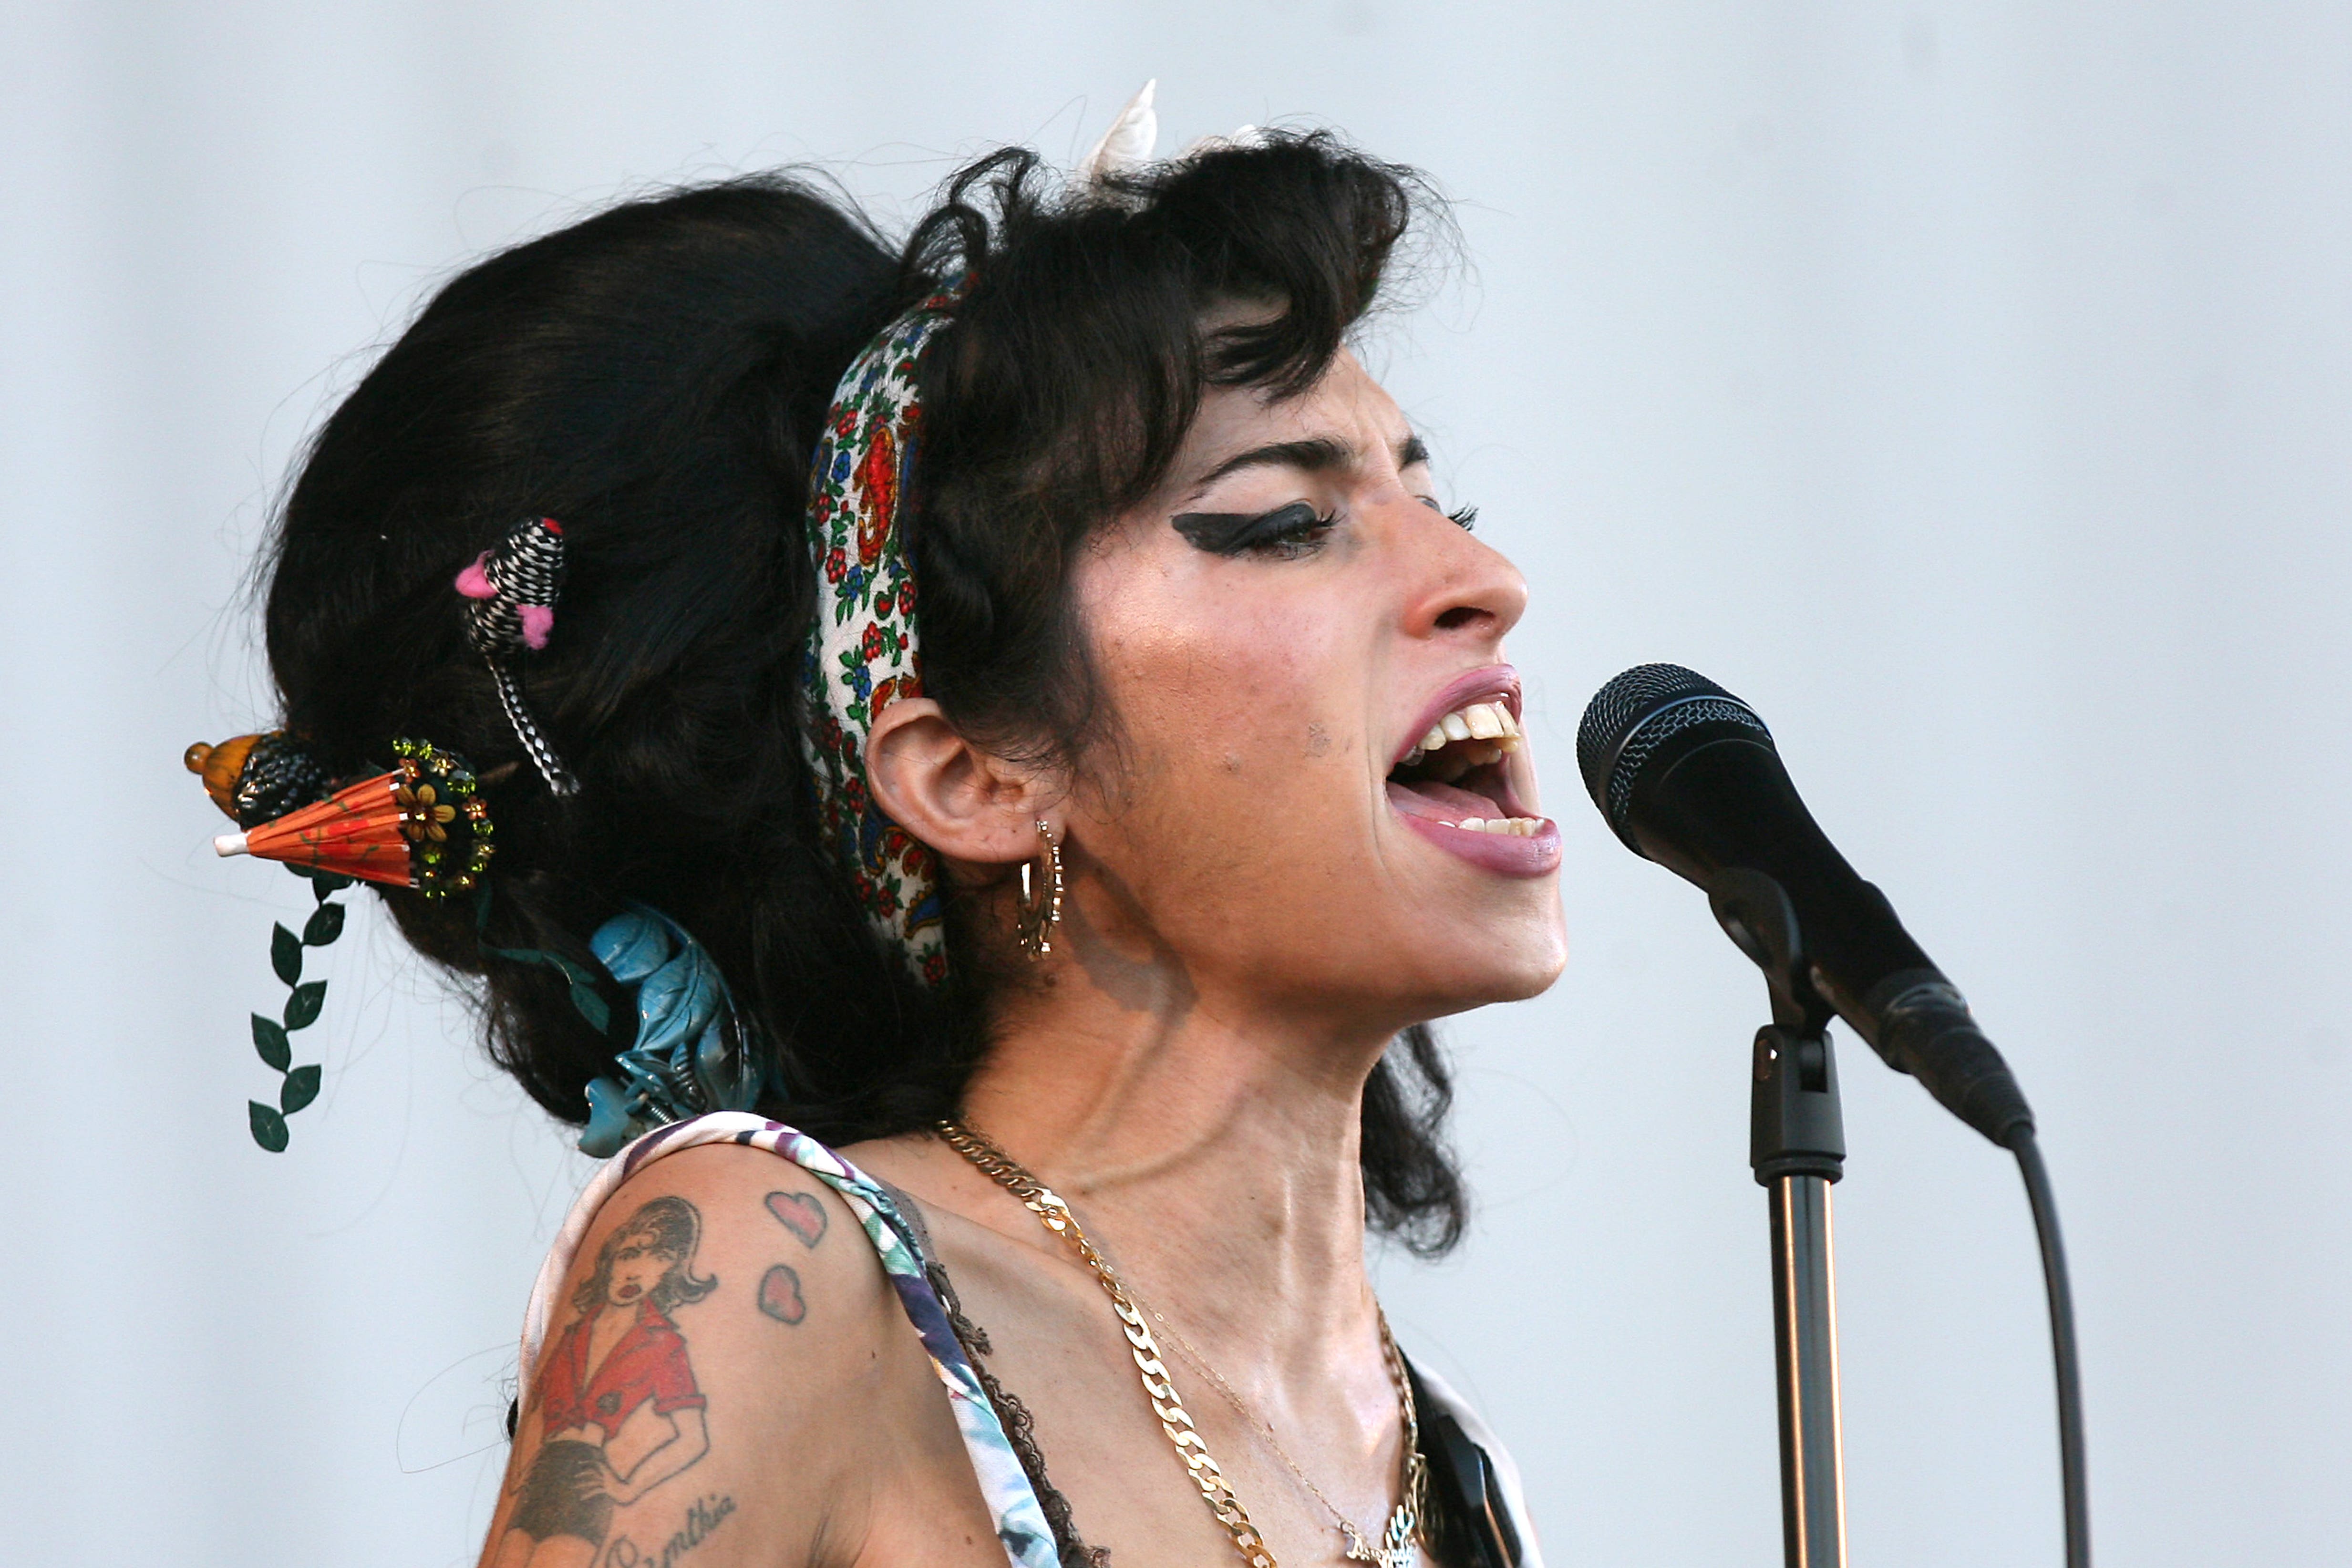 Amy Winehouse died in 2011 aged 27